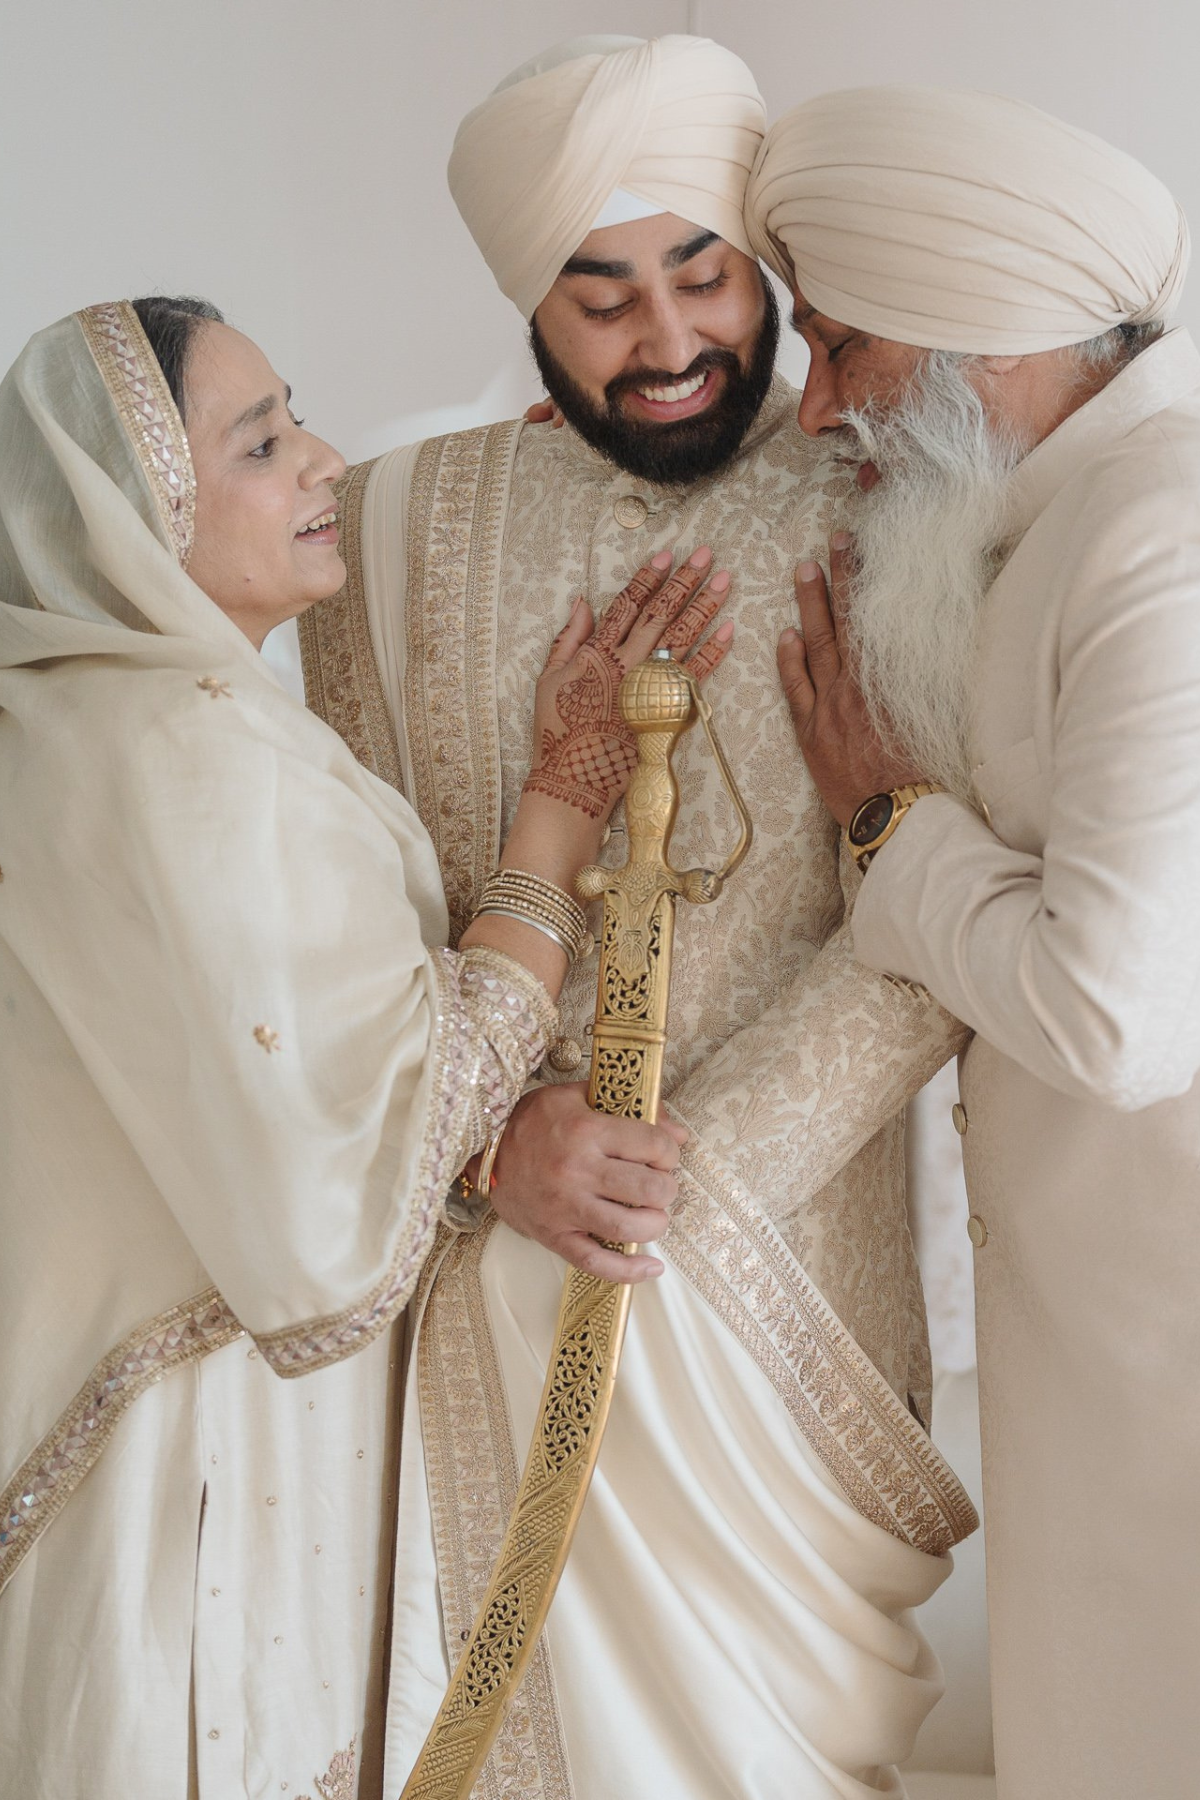 sikh-wedding-outdoor-groom-ivory-sherwani-sword-father-mother-son